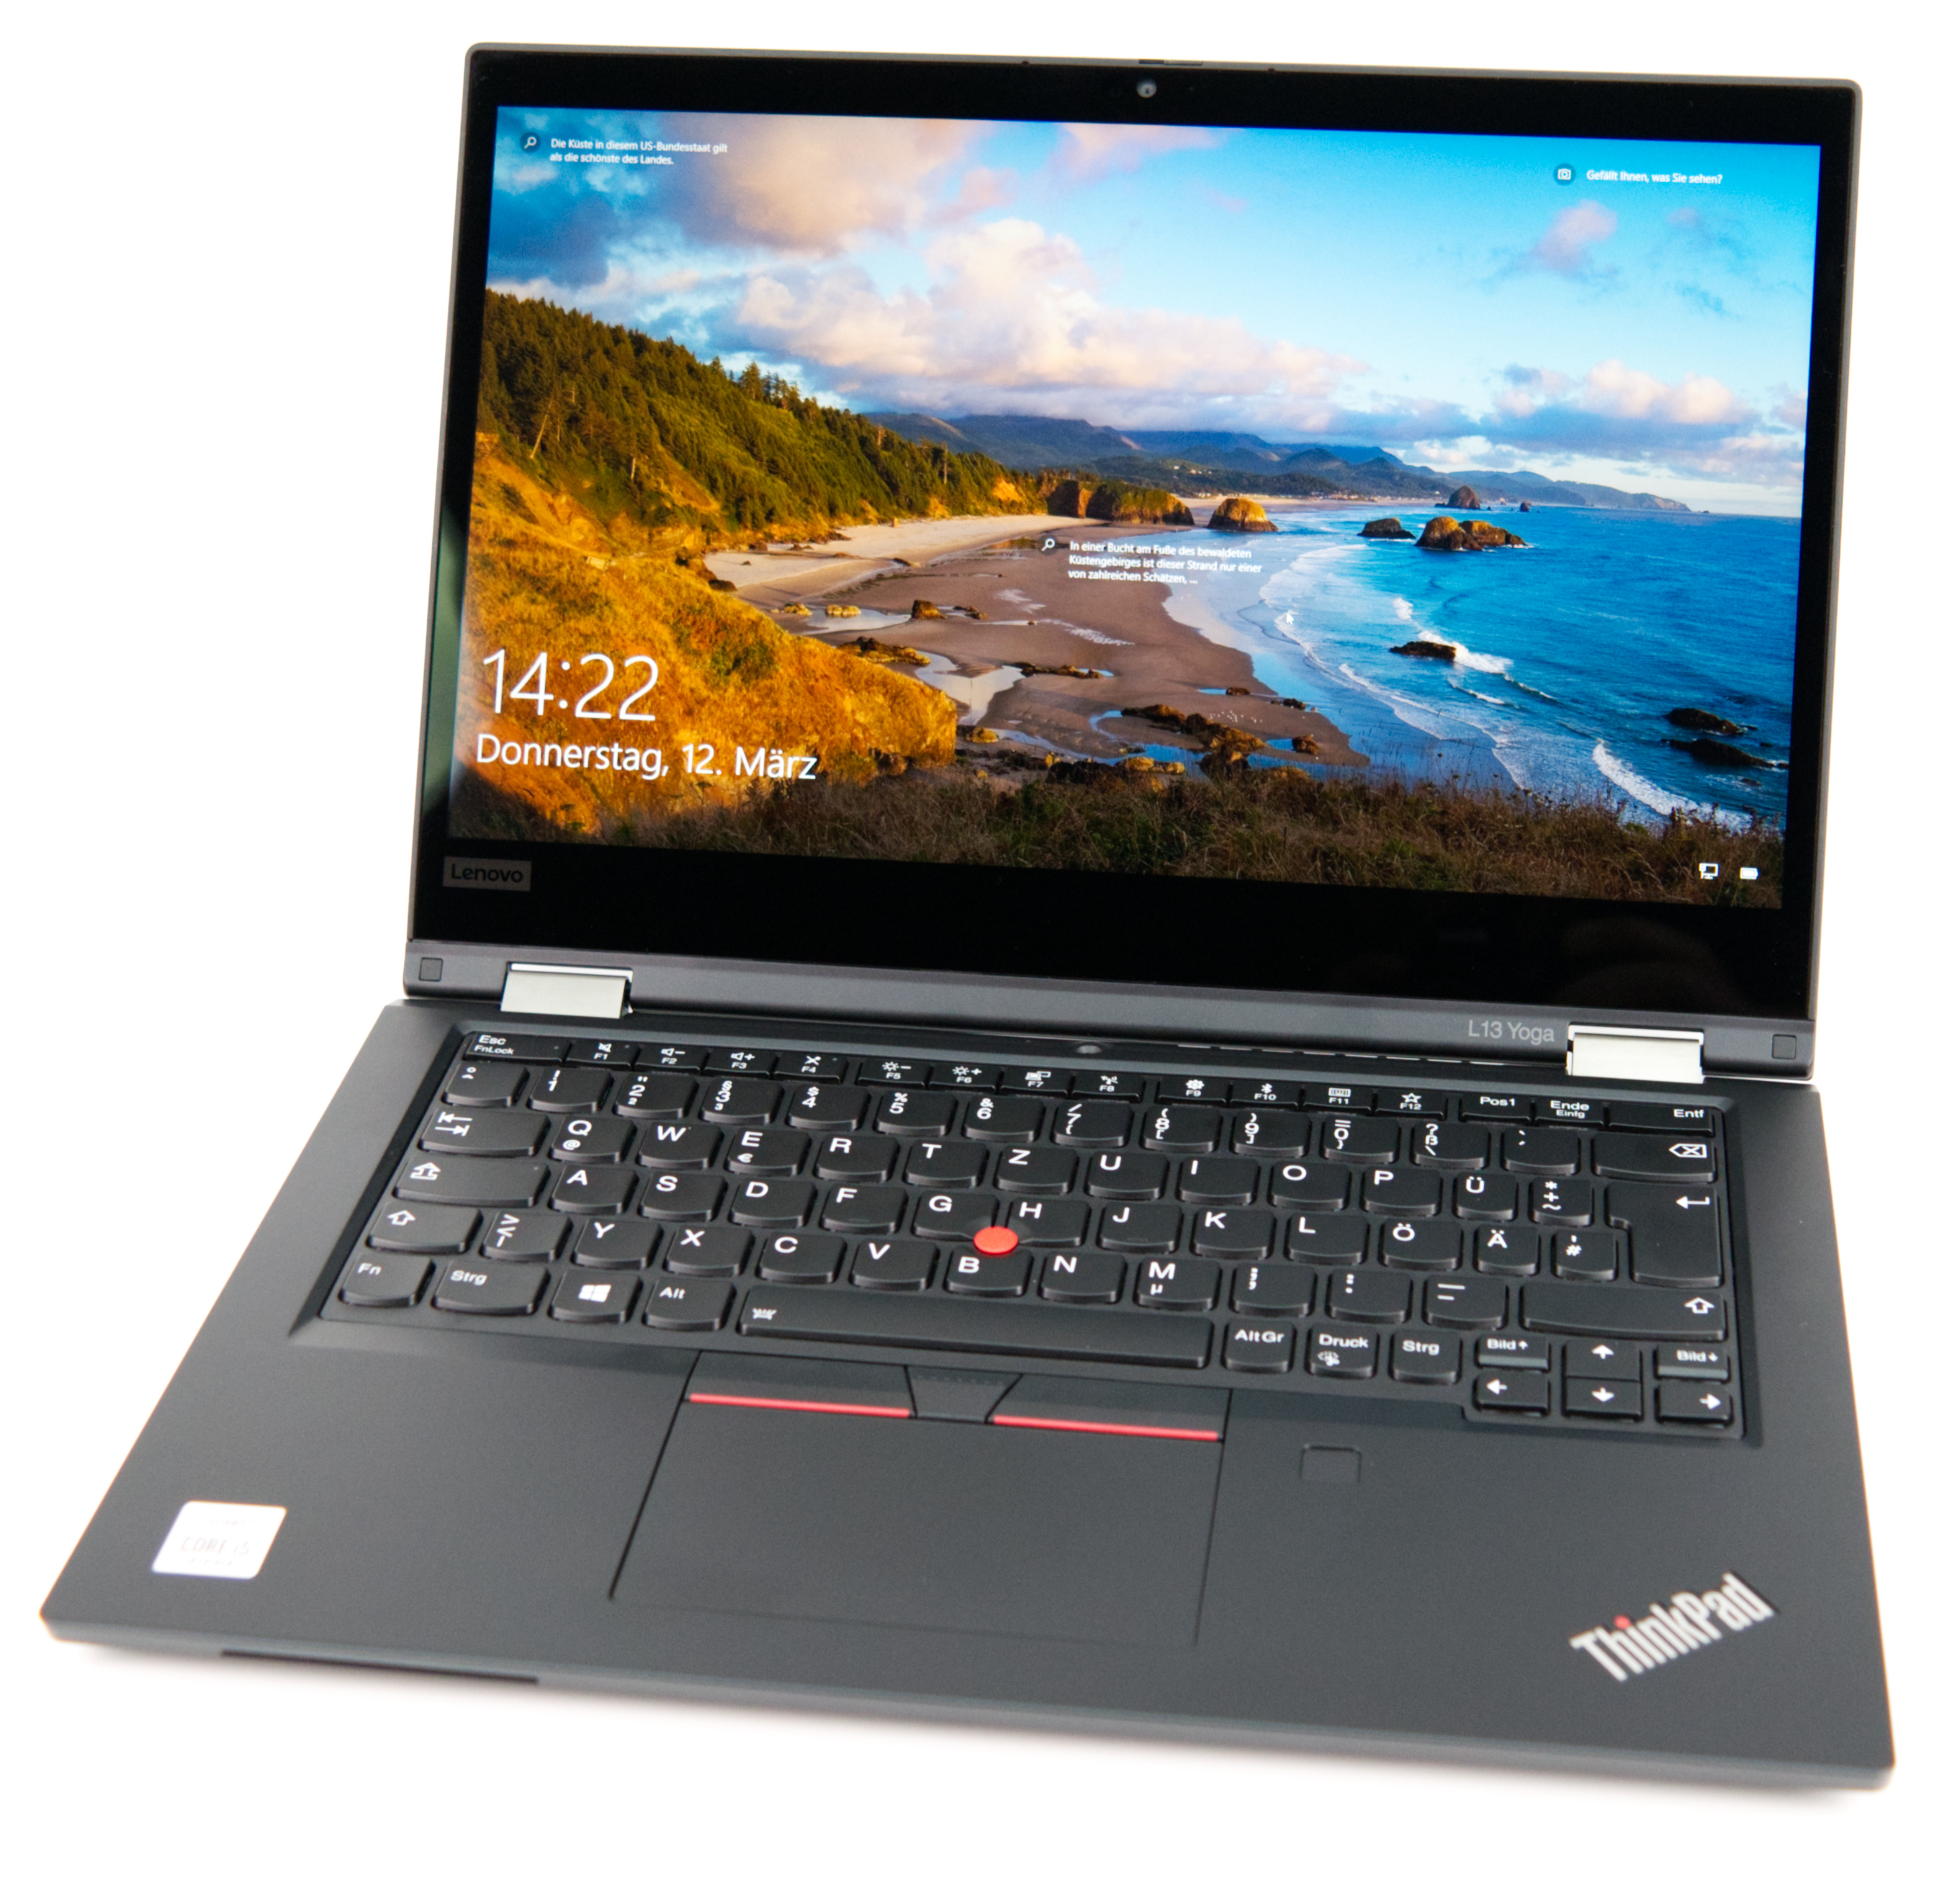 Lenovo ThinkPad L13 Yoga review: Business convertible with good equipment - NotebookCheck.net